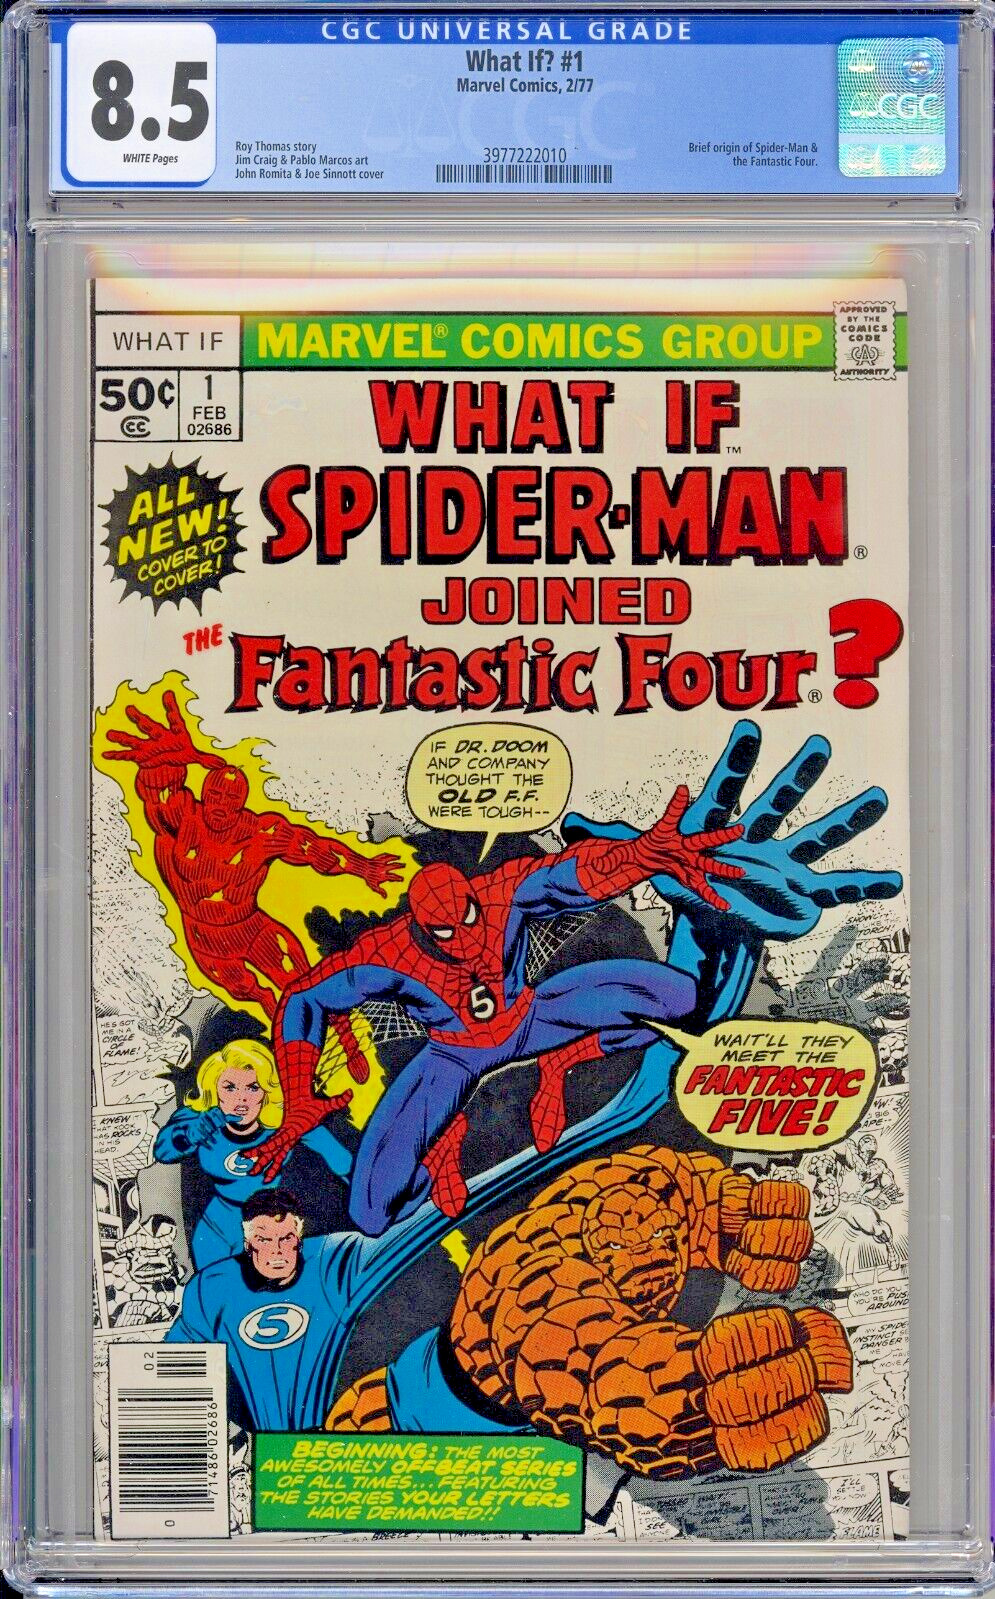 WHAT IF SPIDERMAN JOINED THE FANTASTIC FOUR # 1 CGC 8.5 BRONZE RARE SPIDERMAN